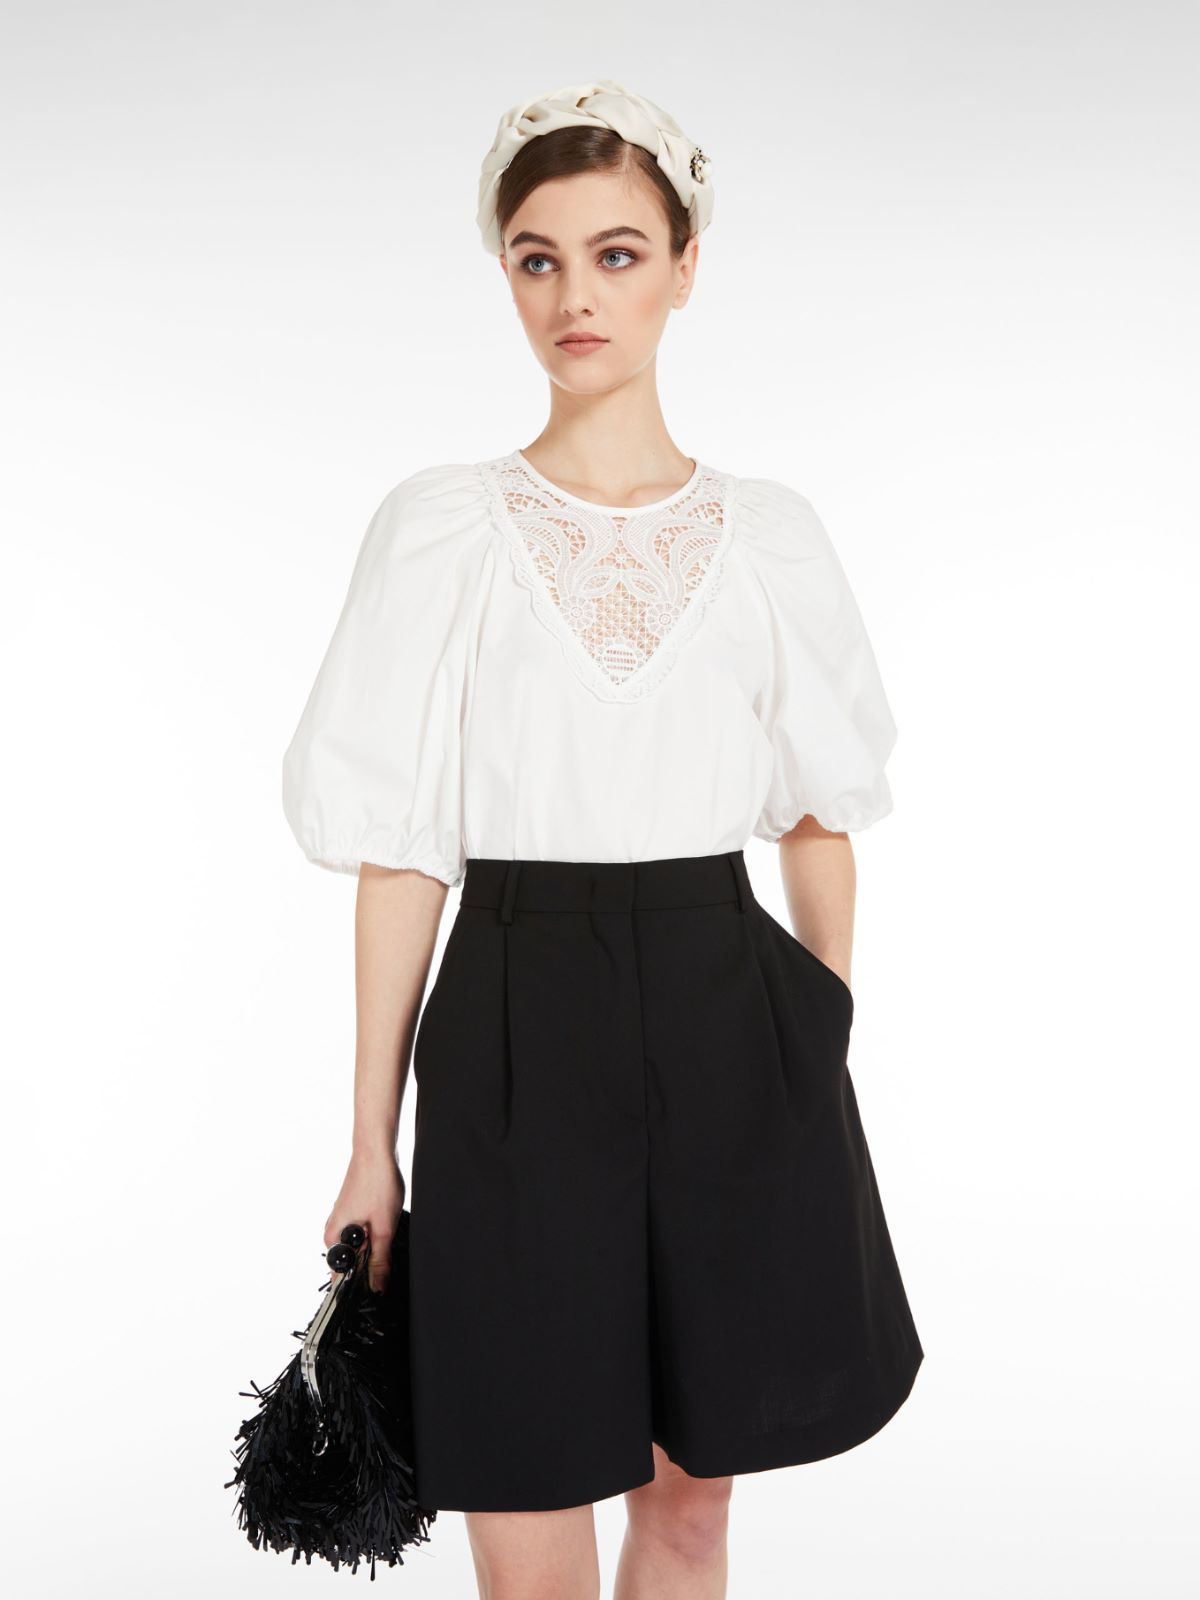 Poplin blouse with embroidery - OPTICAL WHITE - Weekend Max Mara - 4